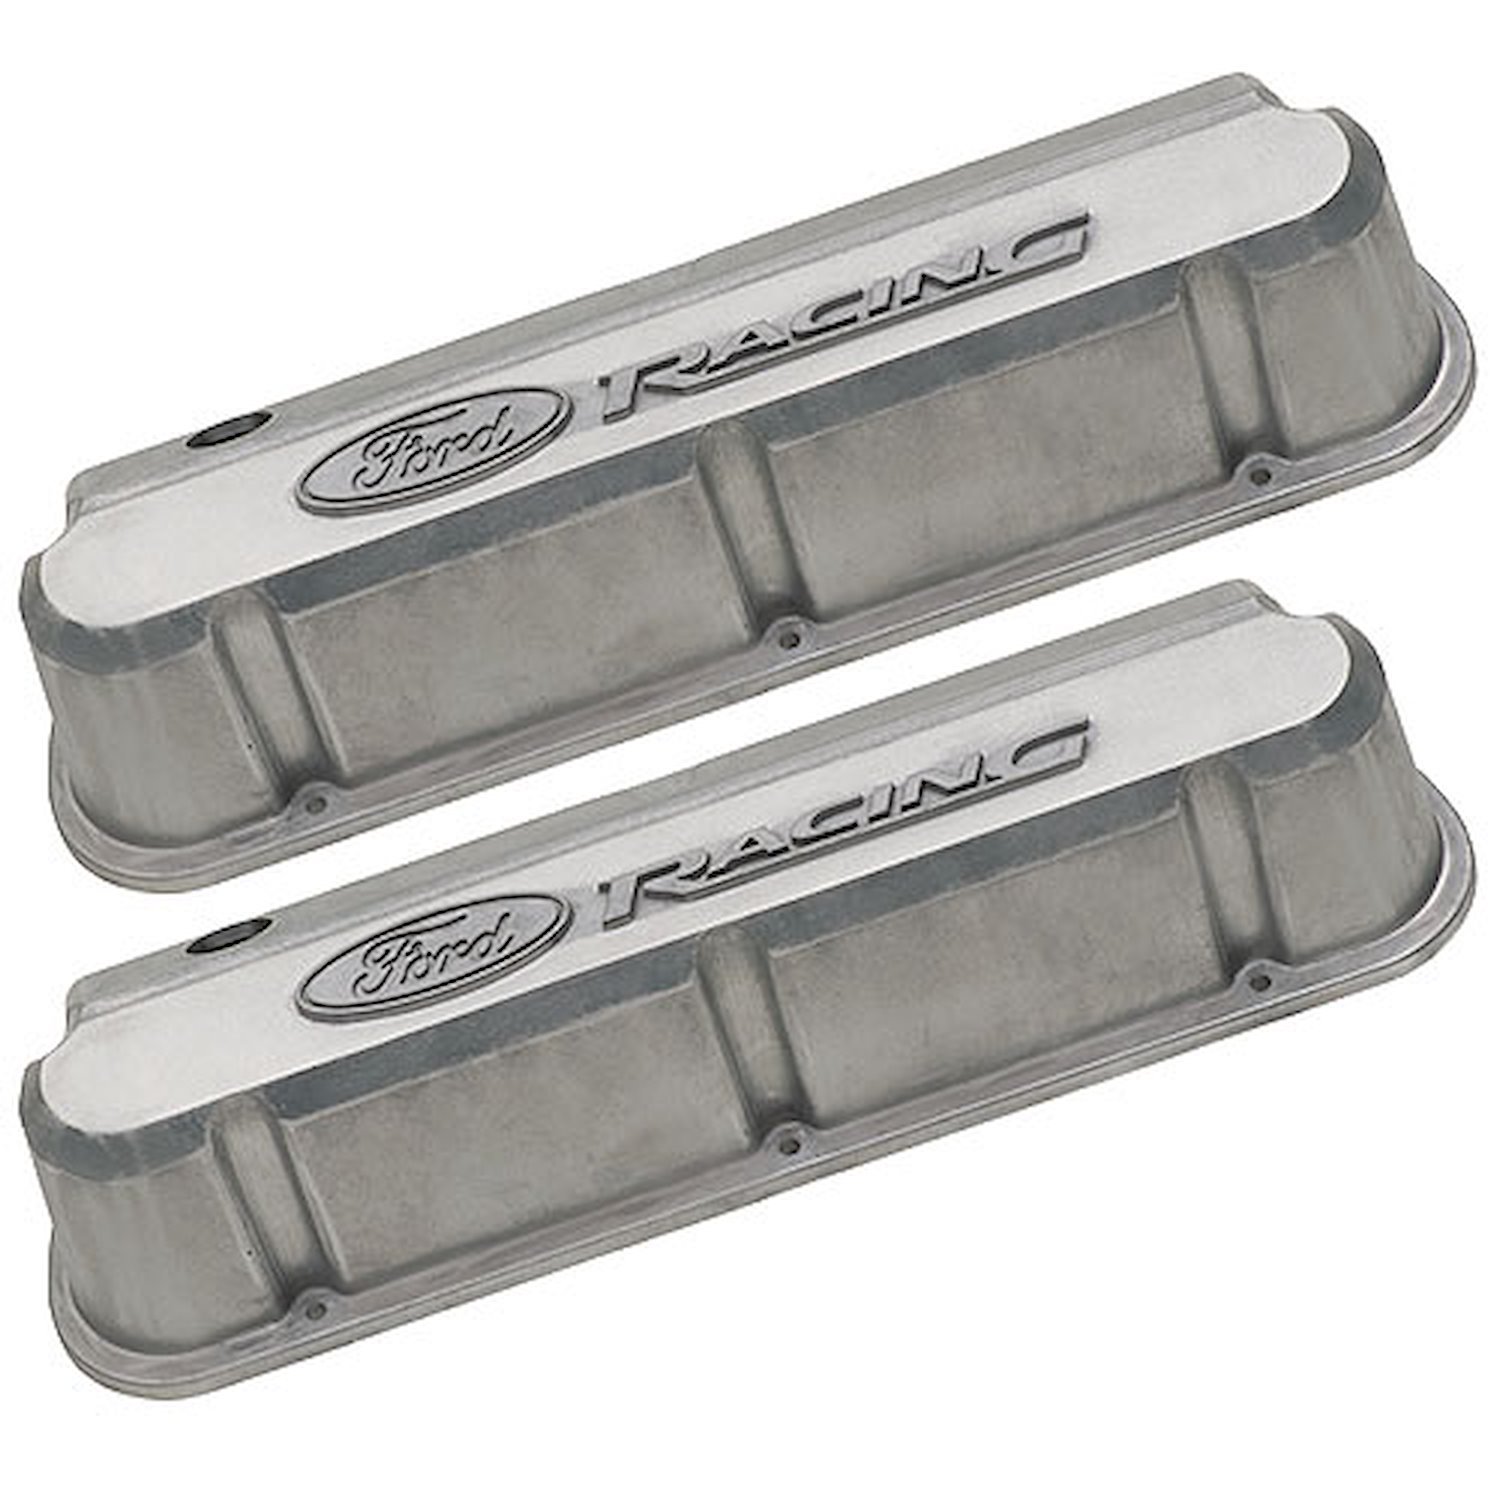 Slant-Edge Tall Aluminum Valve Covers for Small Block Ford 289-302-351W in Natural Cast Finish with Raised Ford Racing Emblem